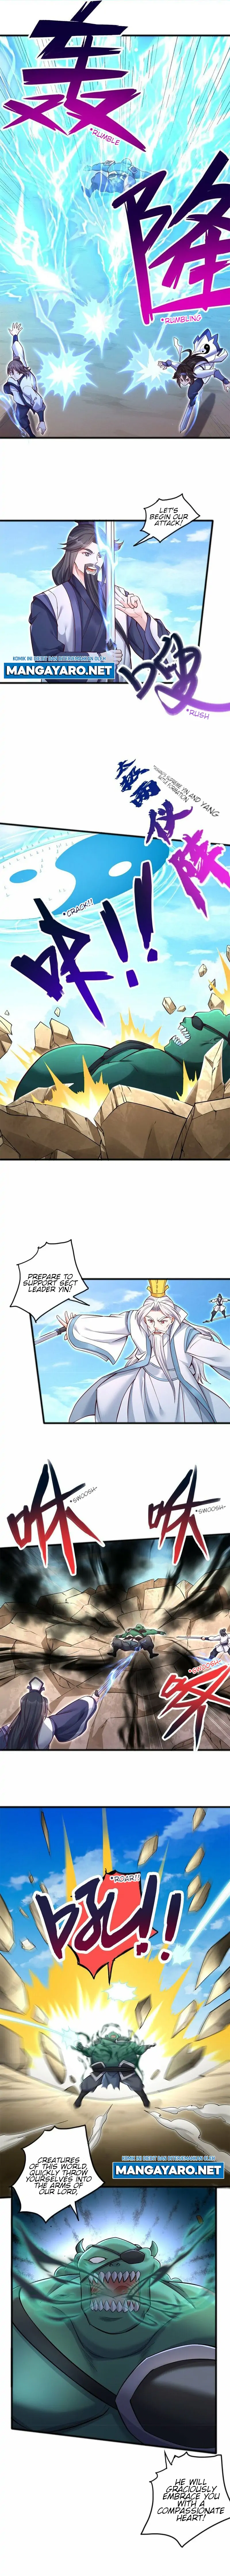 Becoming A Sword Deity By Expanding My Sword Domain - Page 3